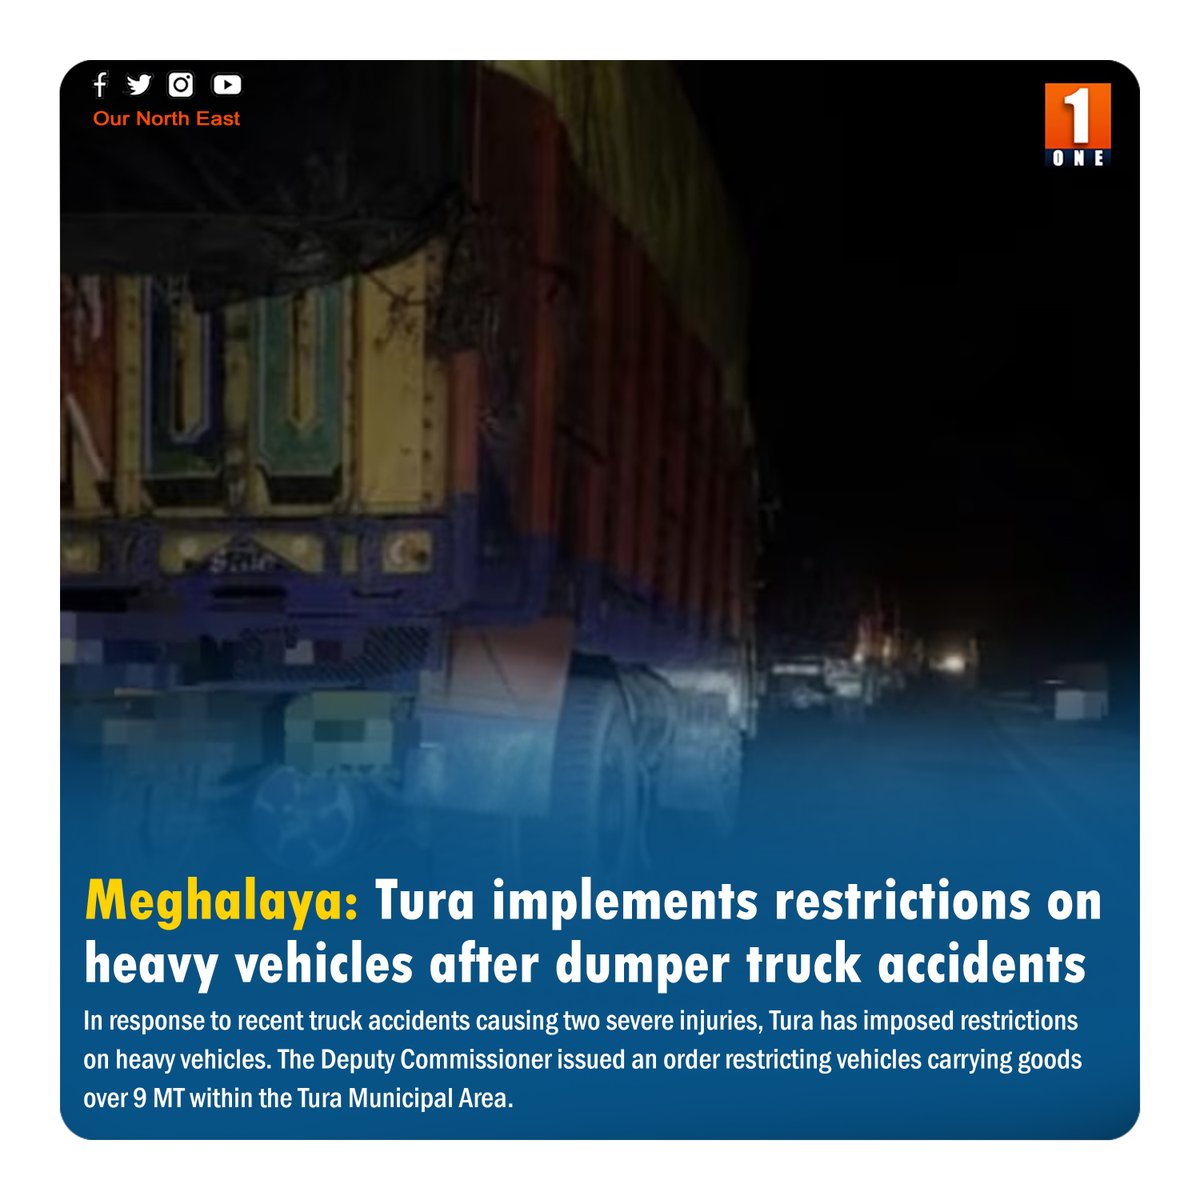 Meghalaya: Tura implements restrictions on heavy vehicles after dumper truck accidents

In response to recent truck accidents causing two severe injuries, Tura has imposed restrictions on heavy vehicles.